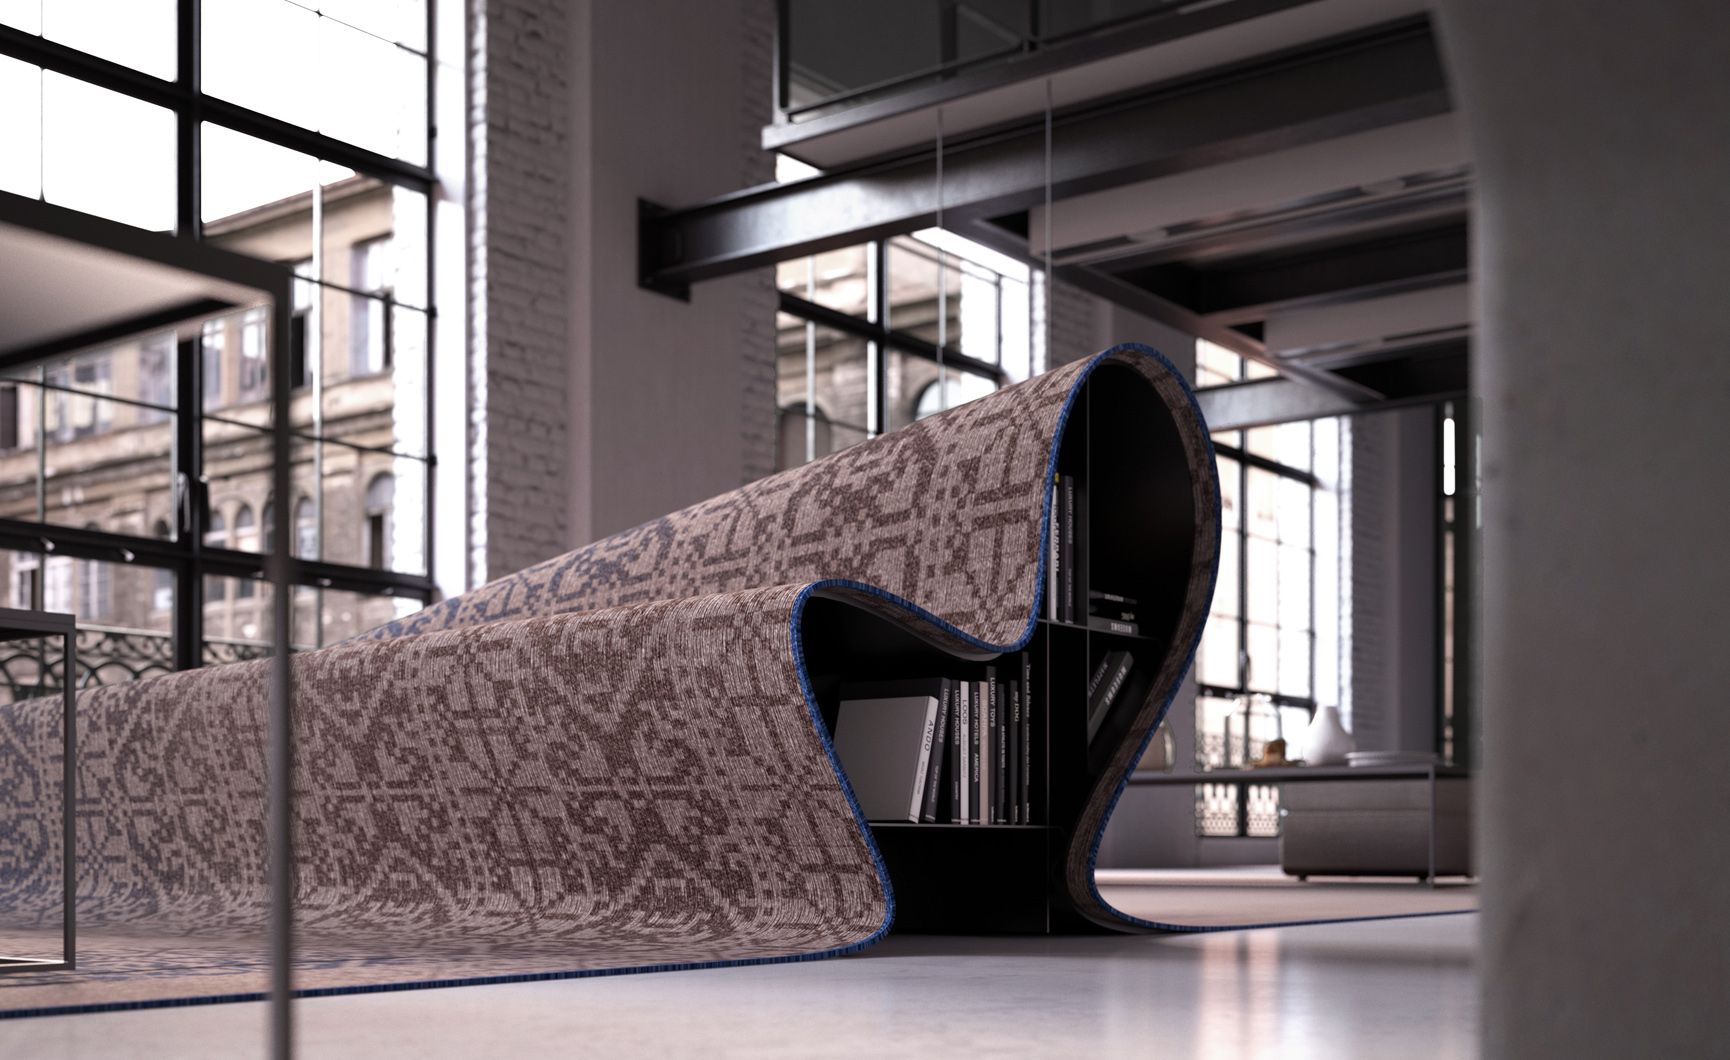 This Carpet-Covered Couch Is Uncomfortable Brilliance